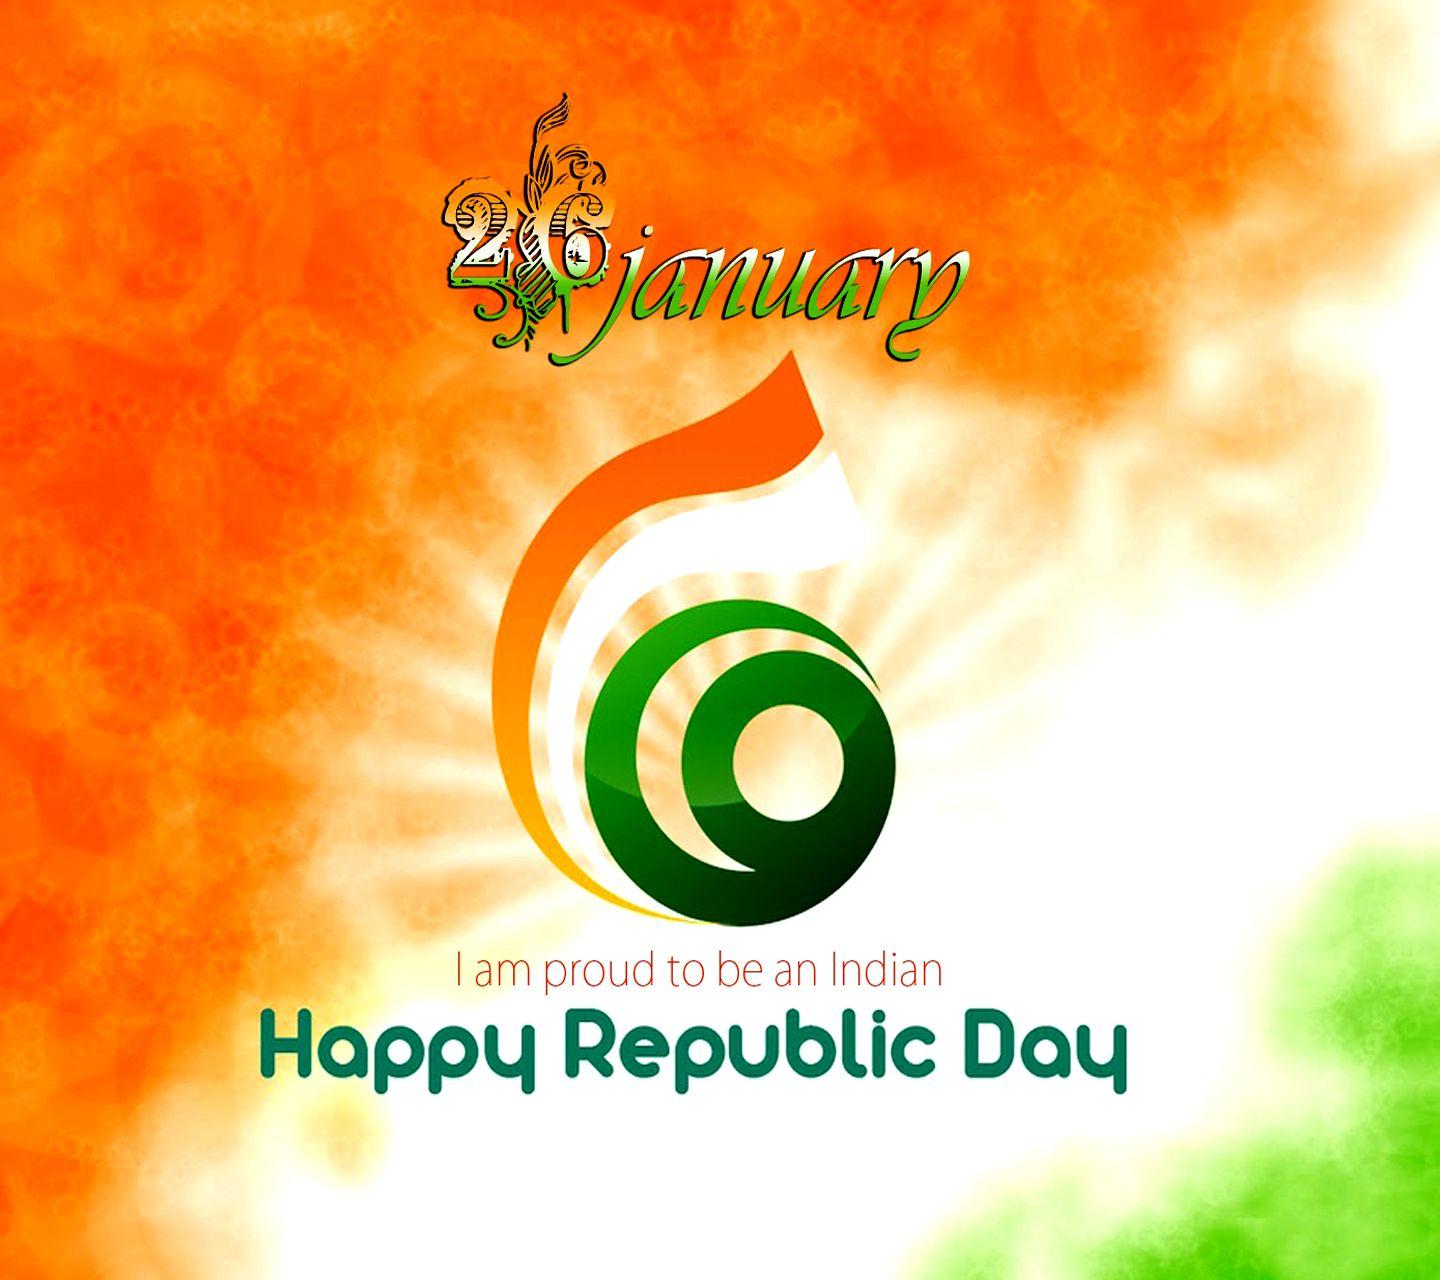 Indian Happy Republic Day Wishes Wallpaper in 3D